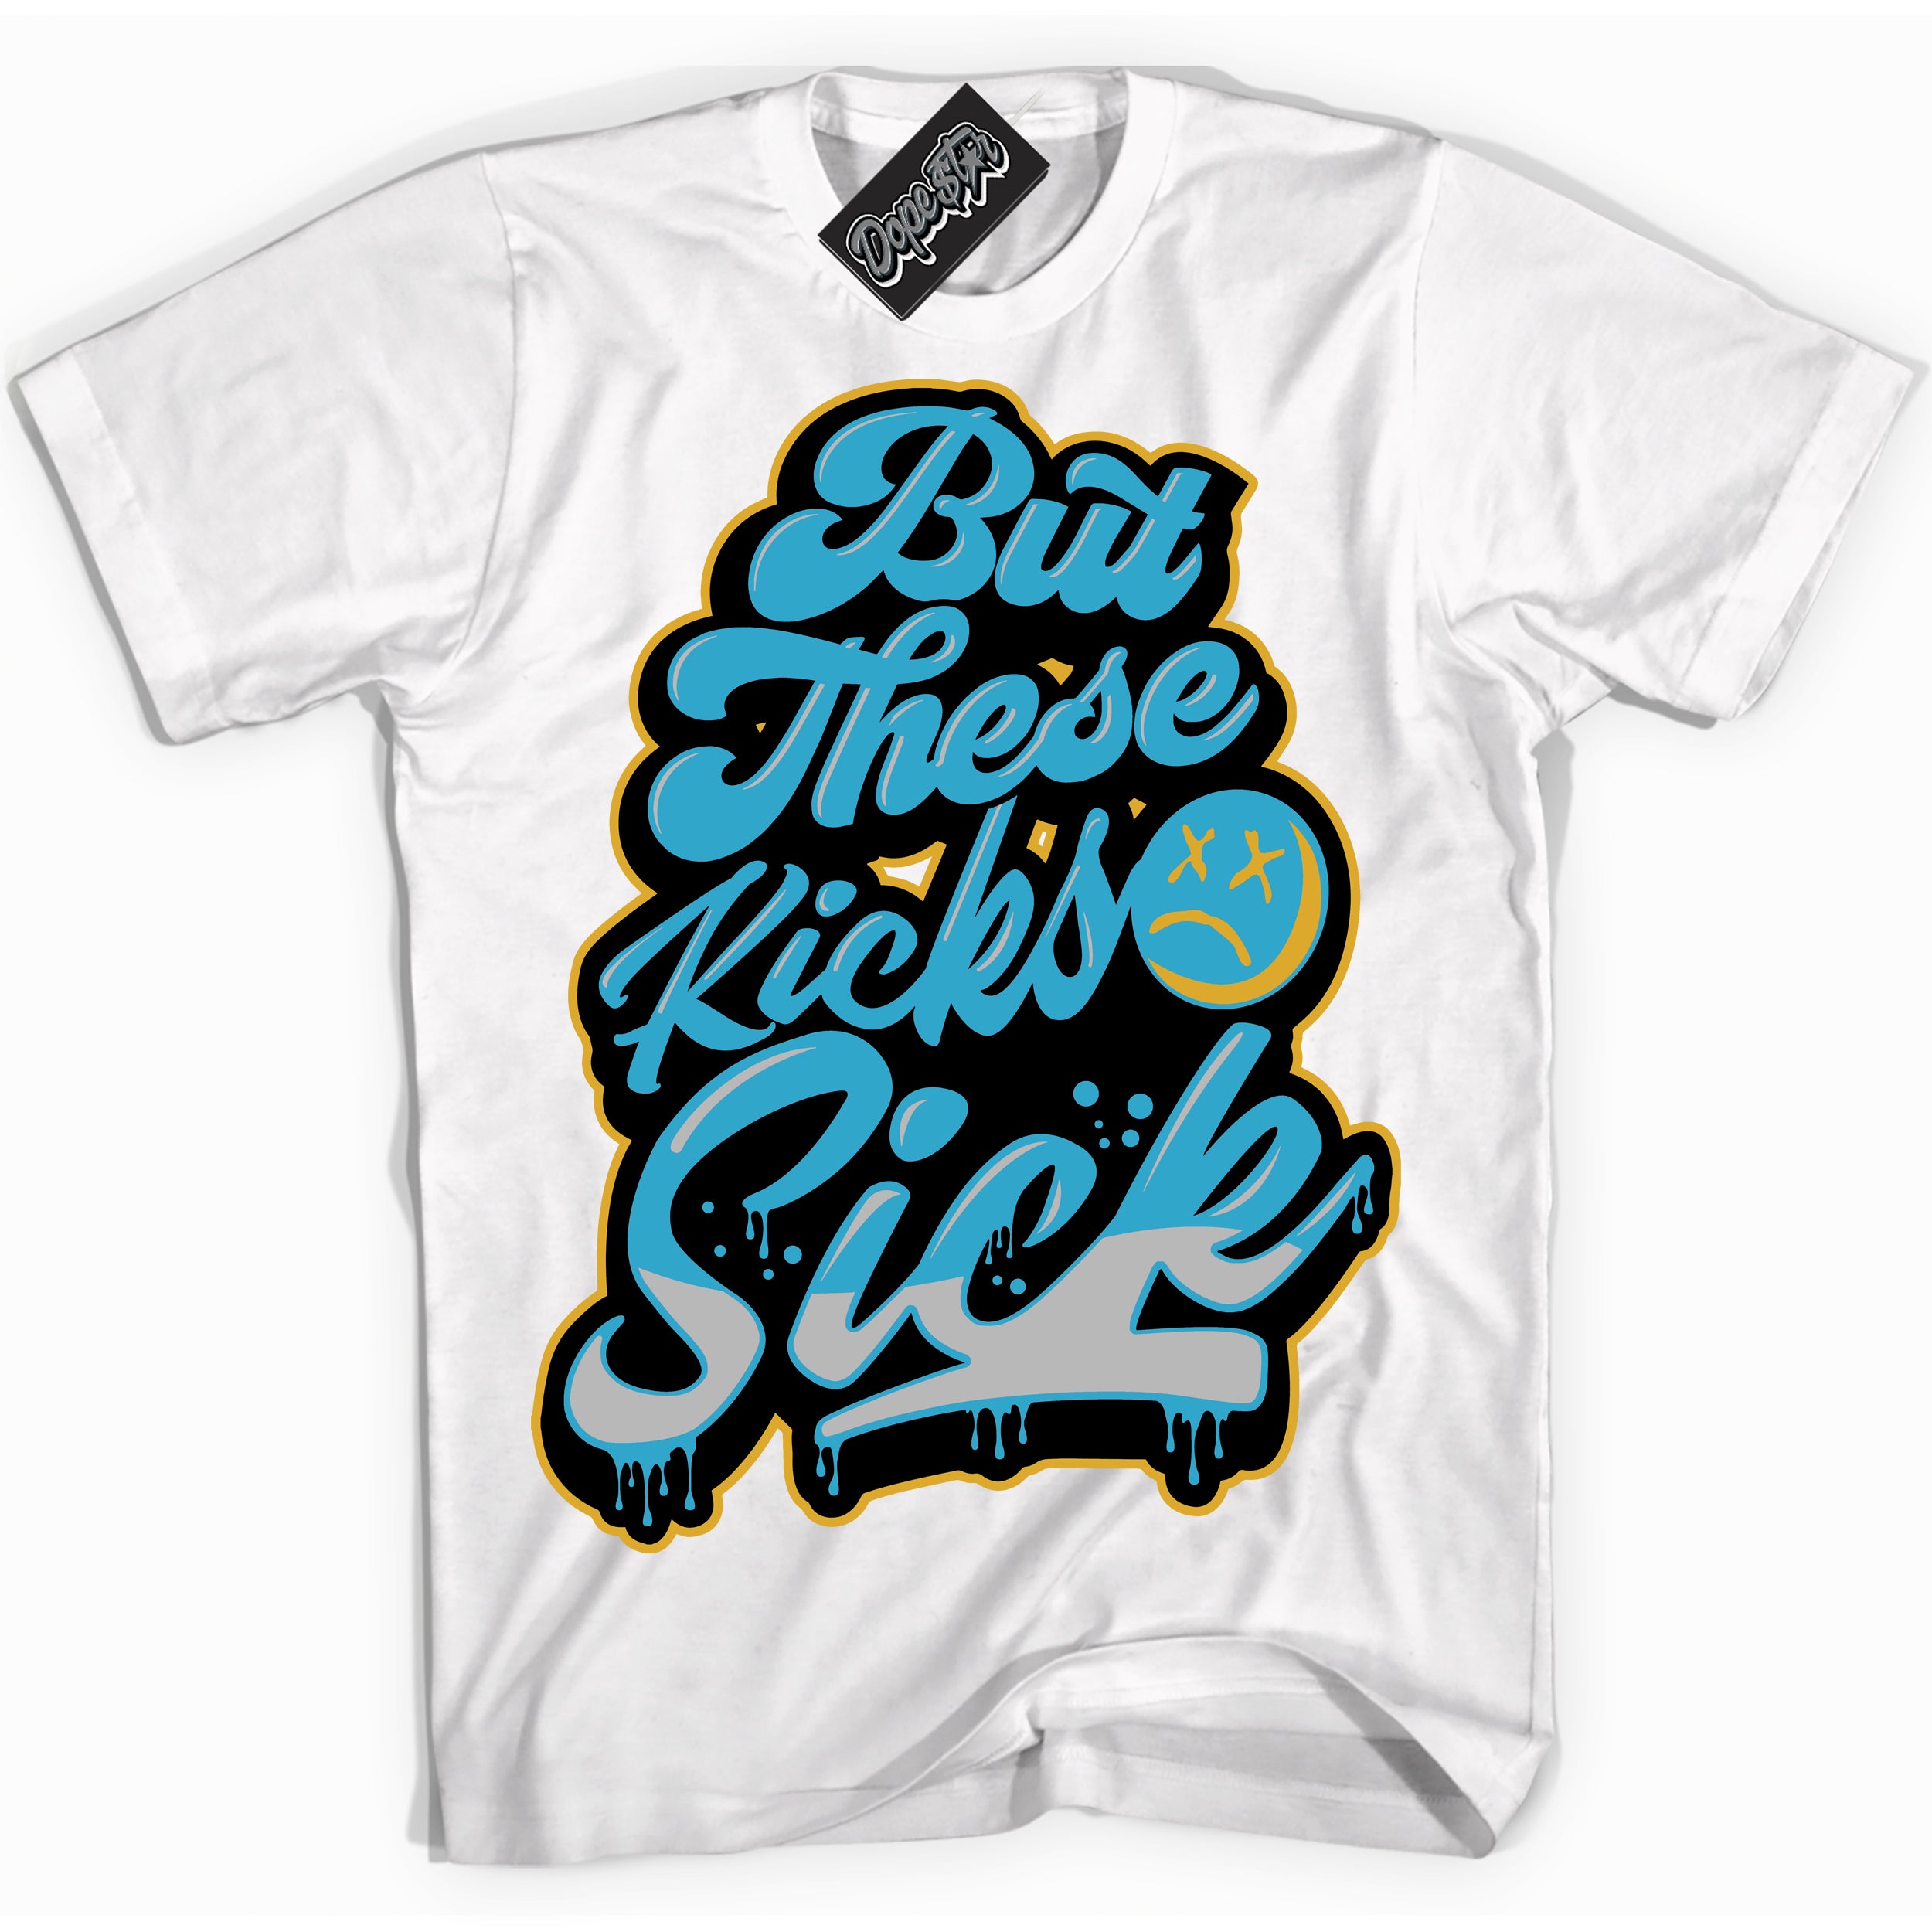 Cool White Shirt with “ Kick Sick” design that perfectly matches Aqua 5s Sneakers.